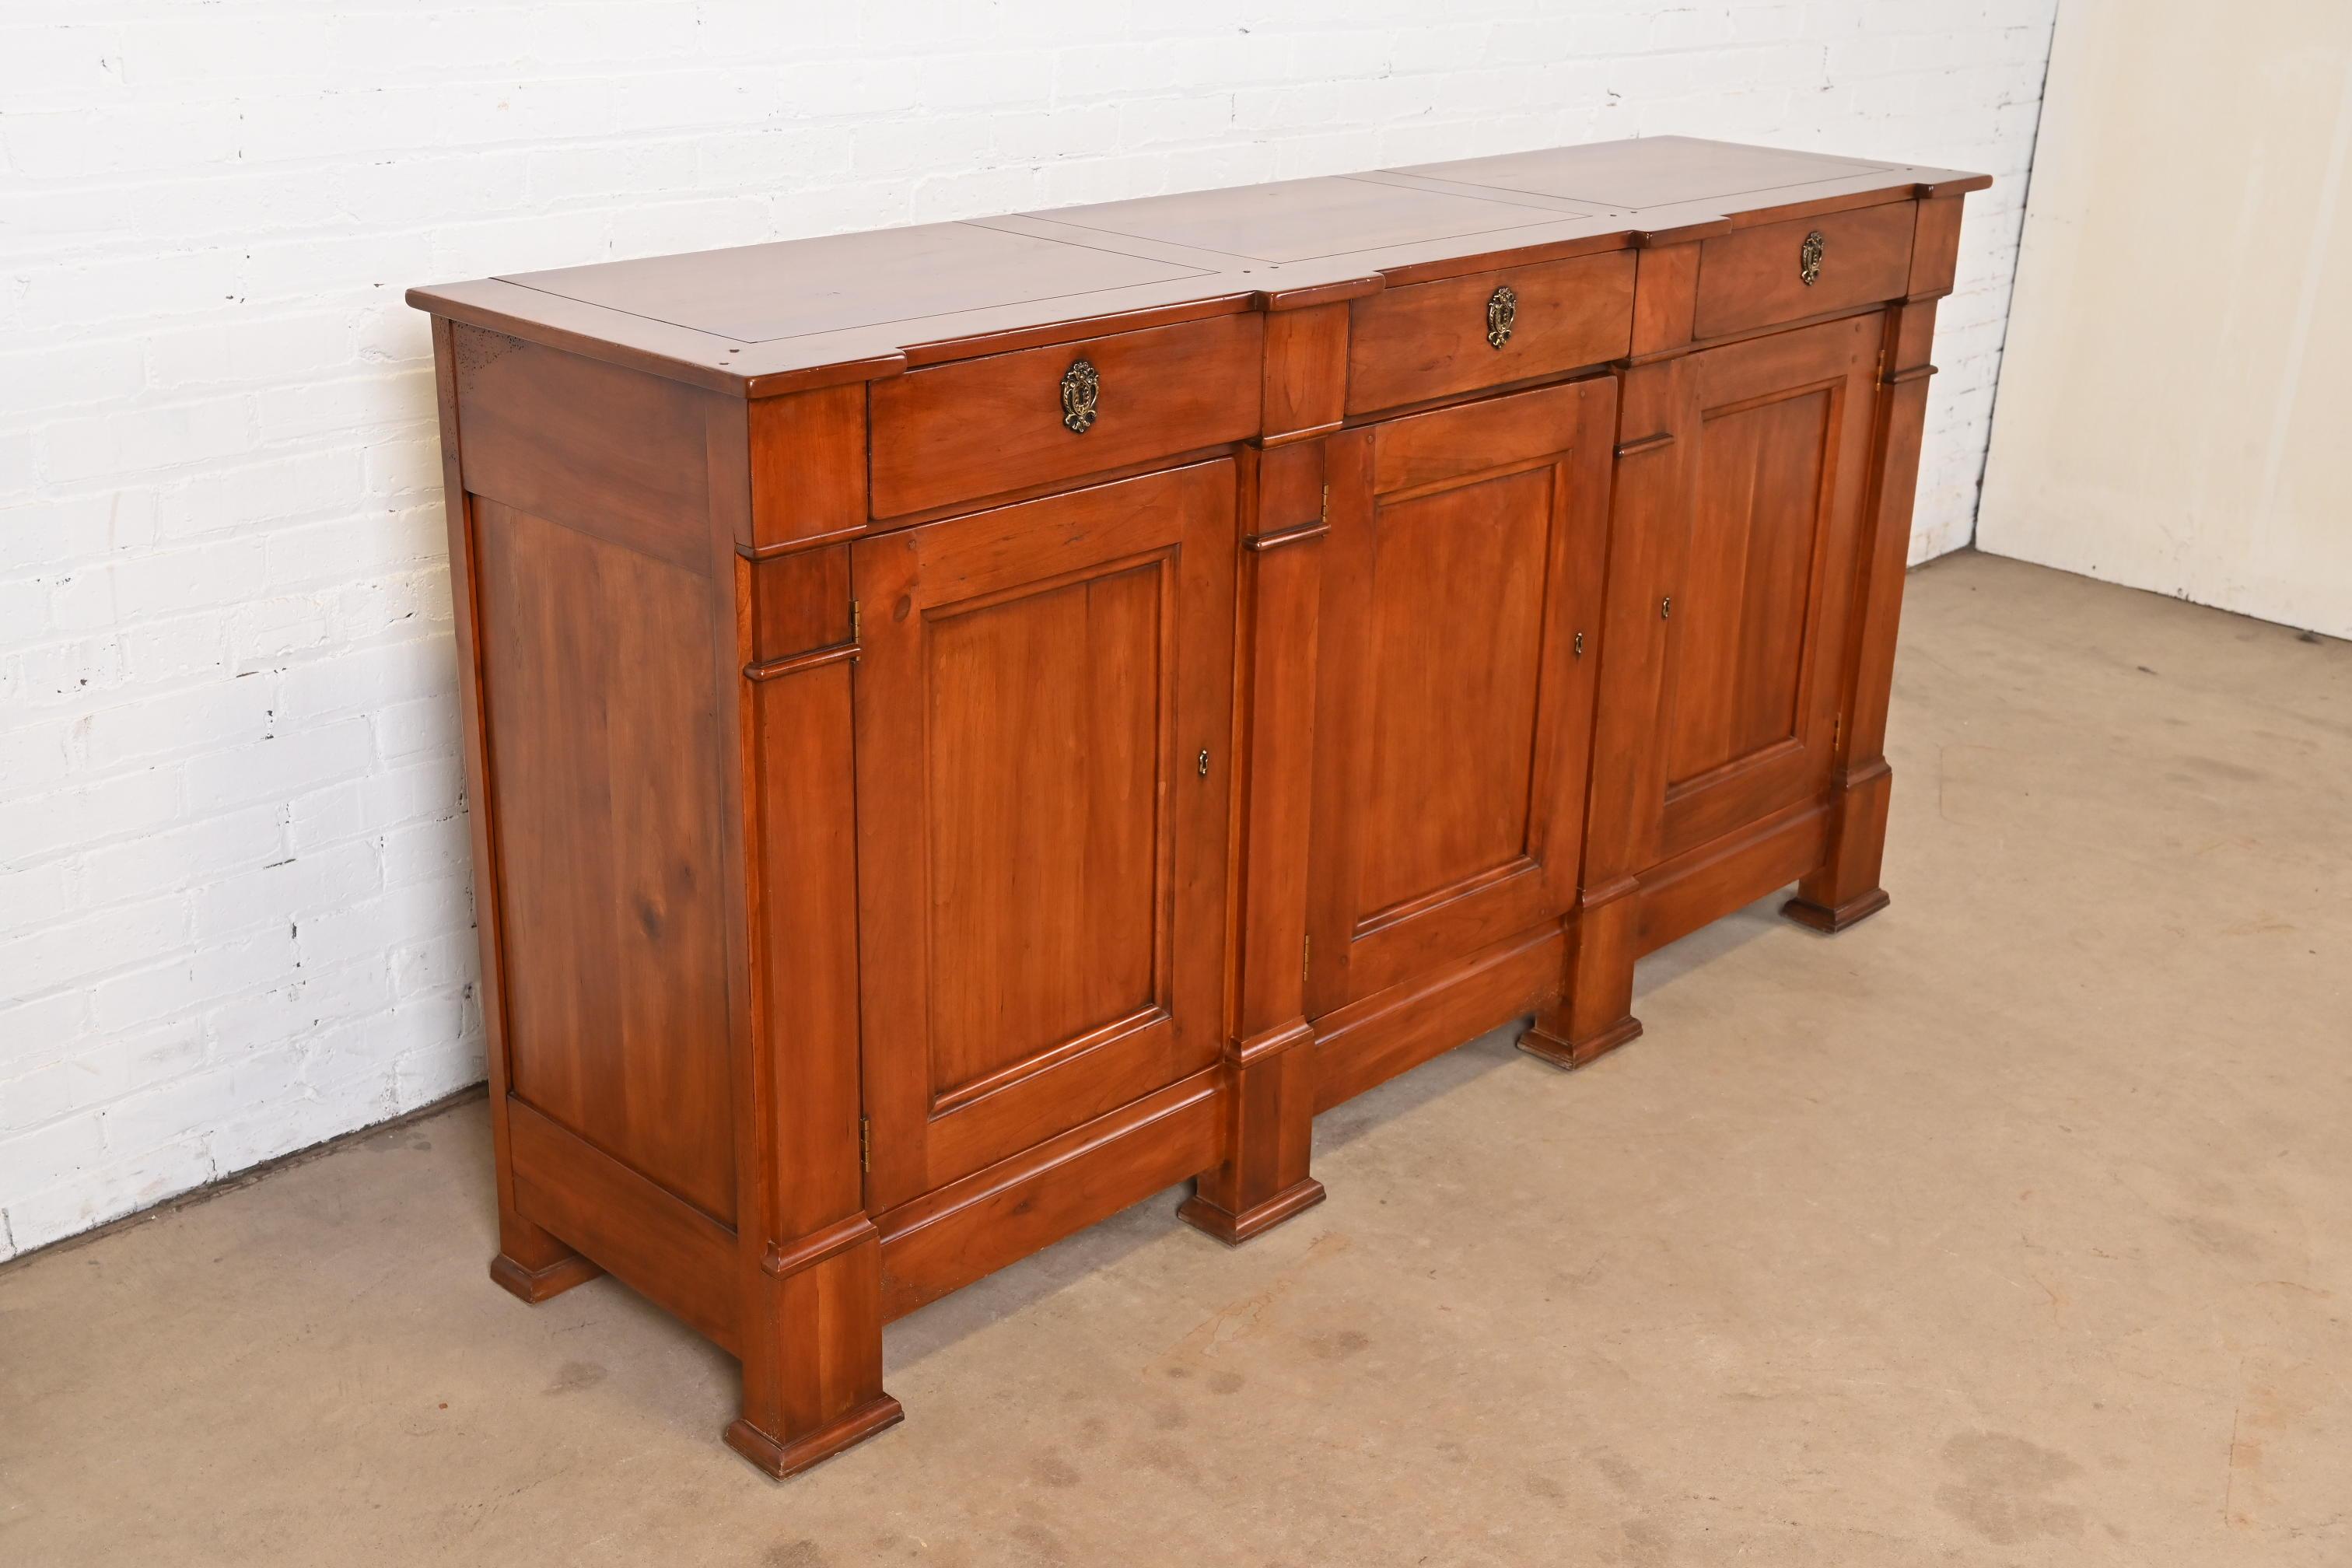 20th Century Henredon Italian Empire Carved Cherry Wood Sideboard or Bar Cabinet